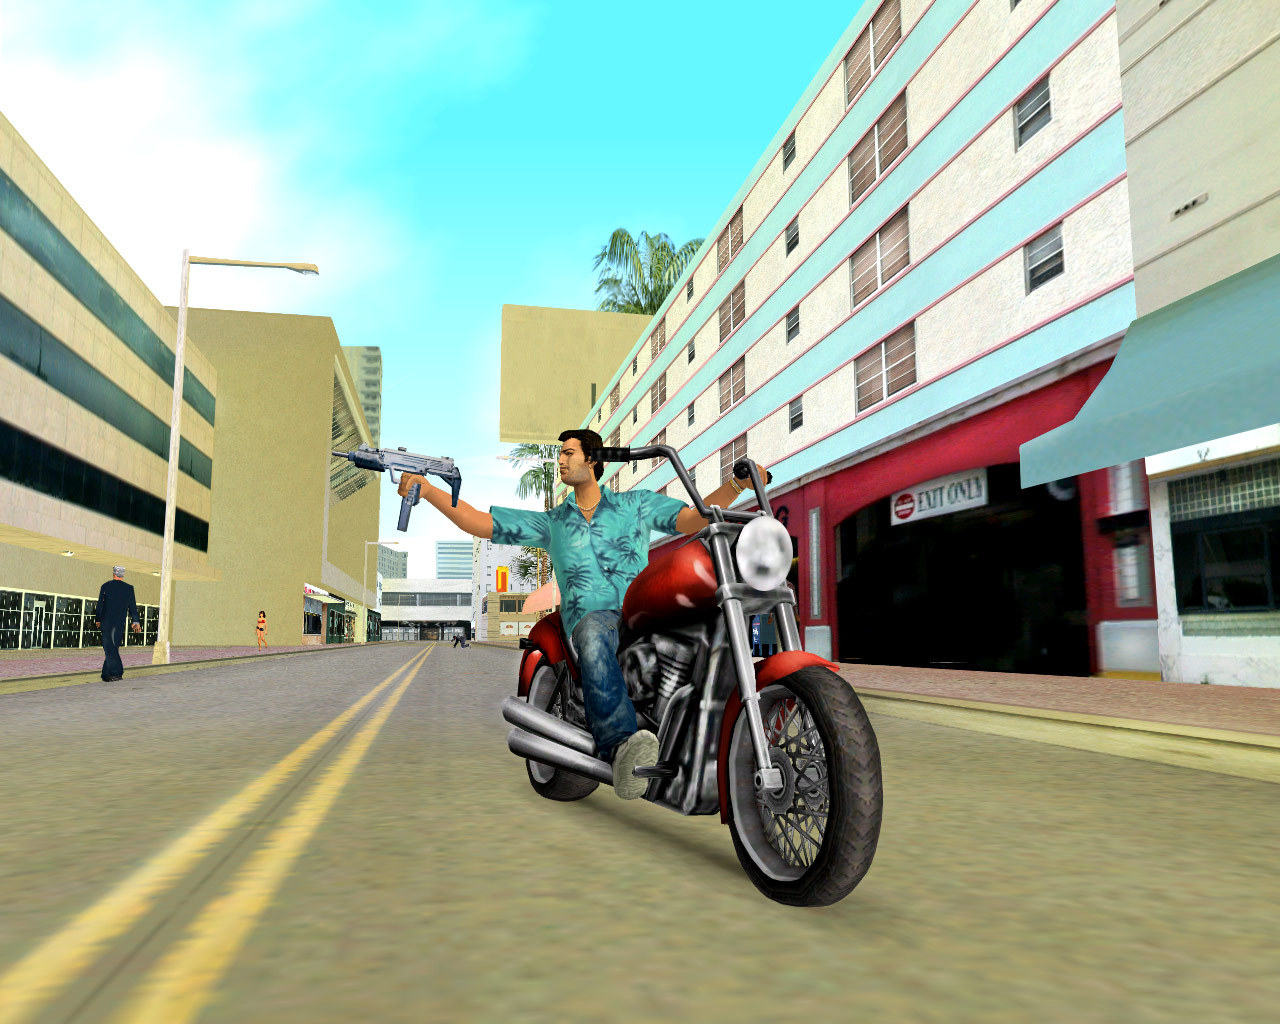 Grand Theft Auto: Vice City (2002) - MobyGames